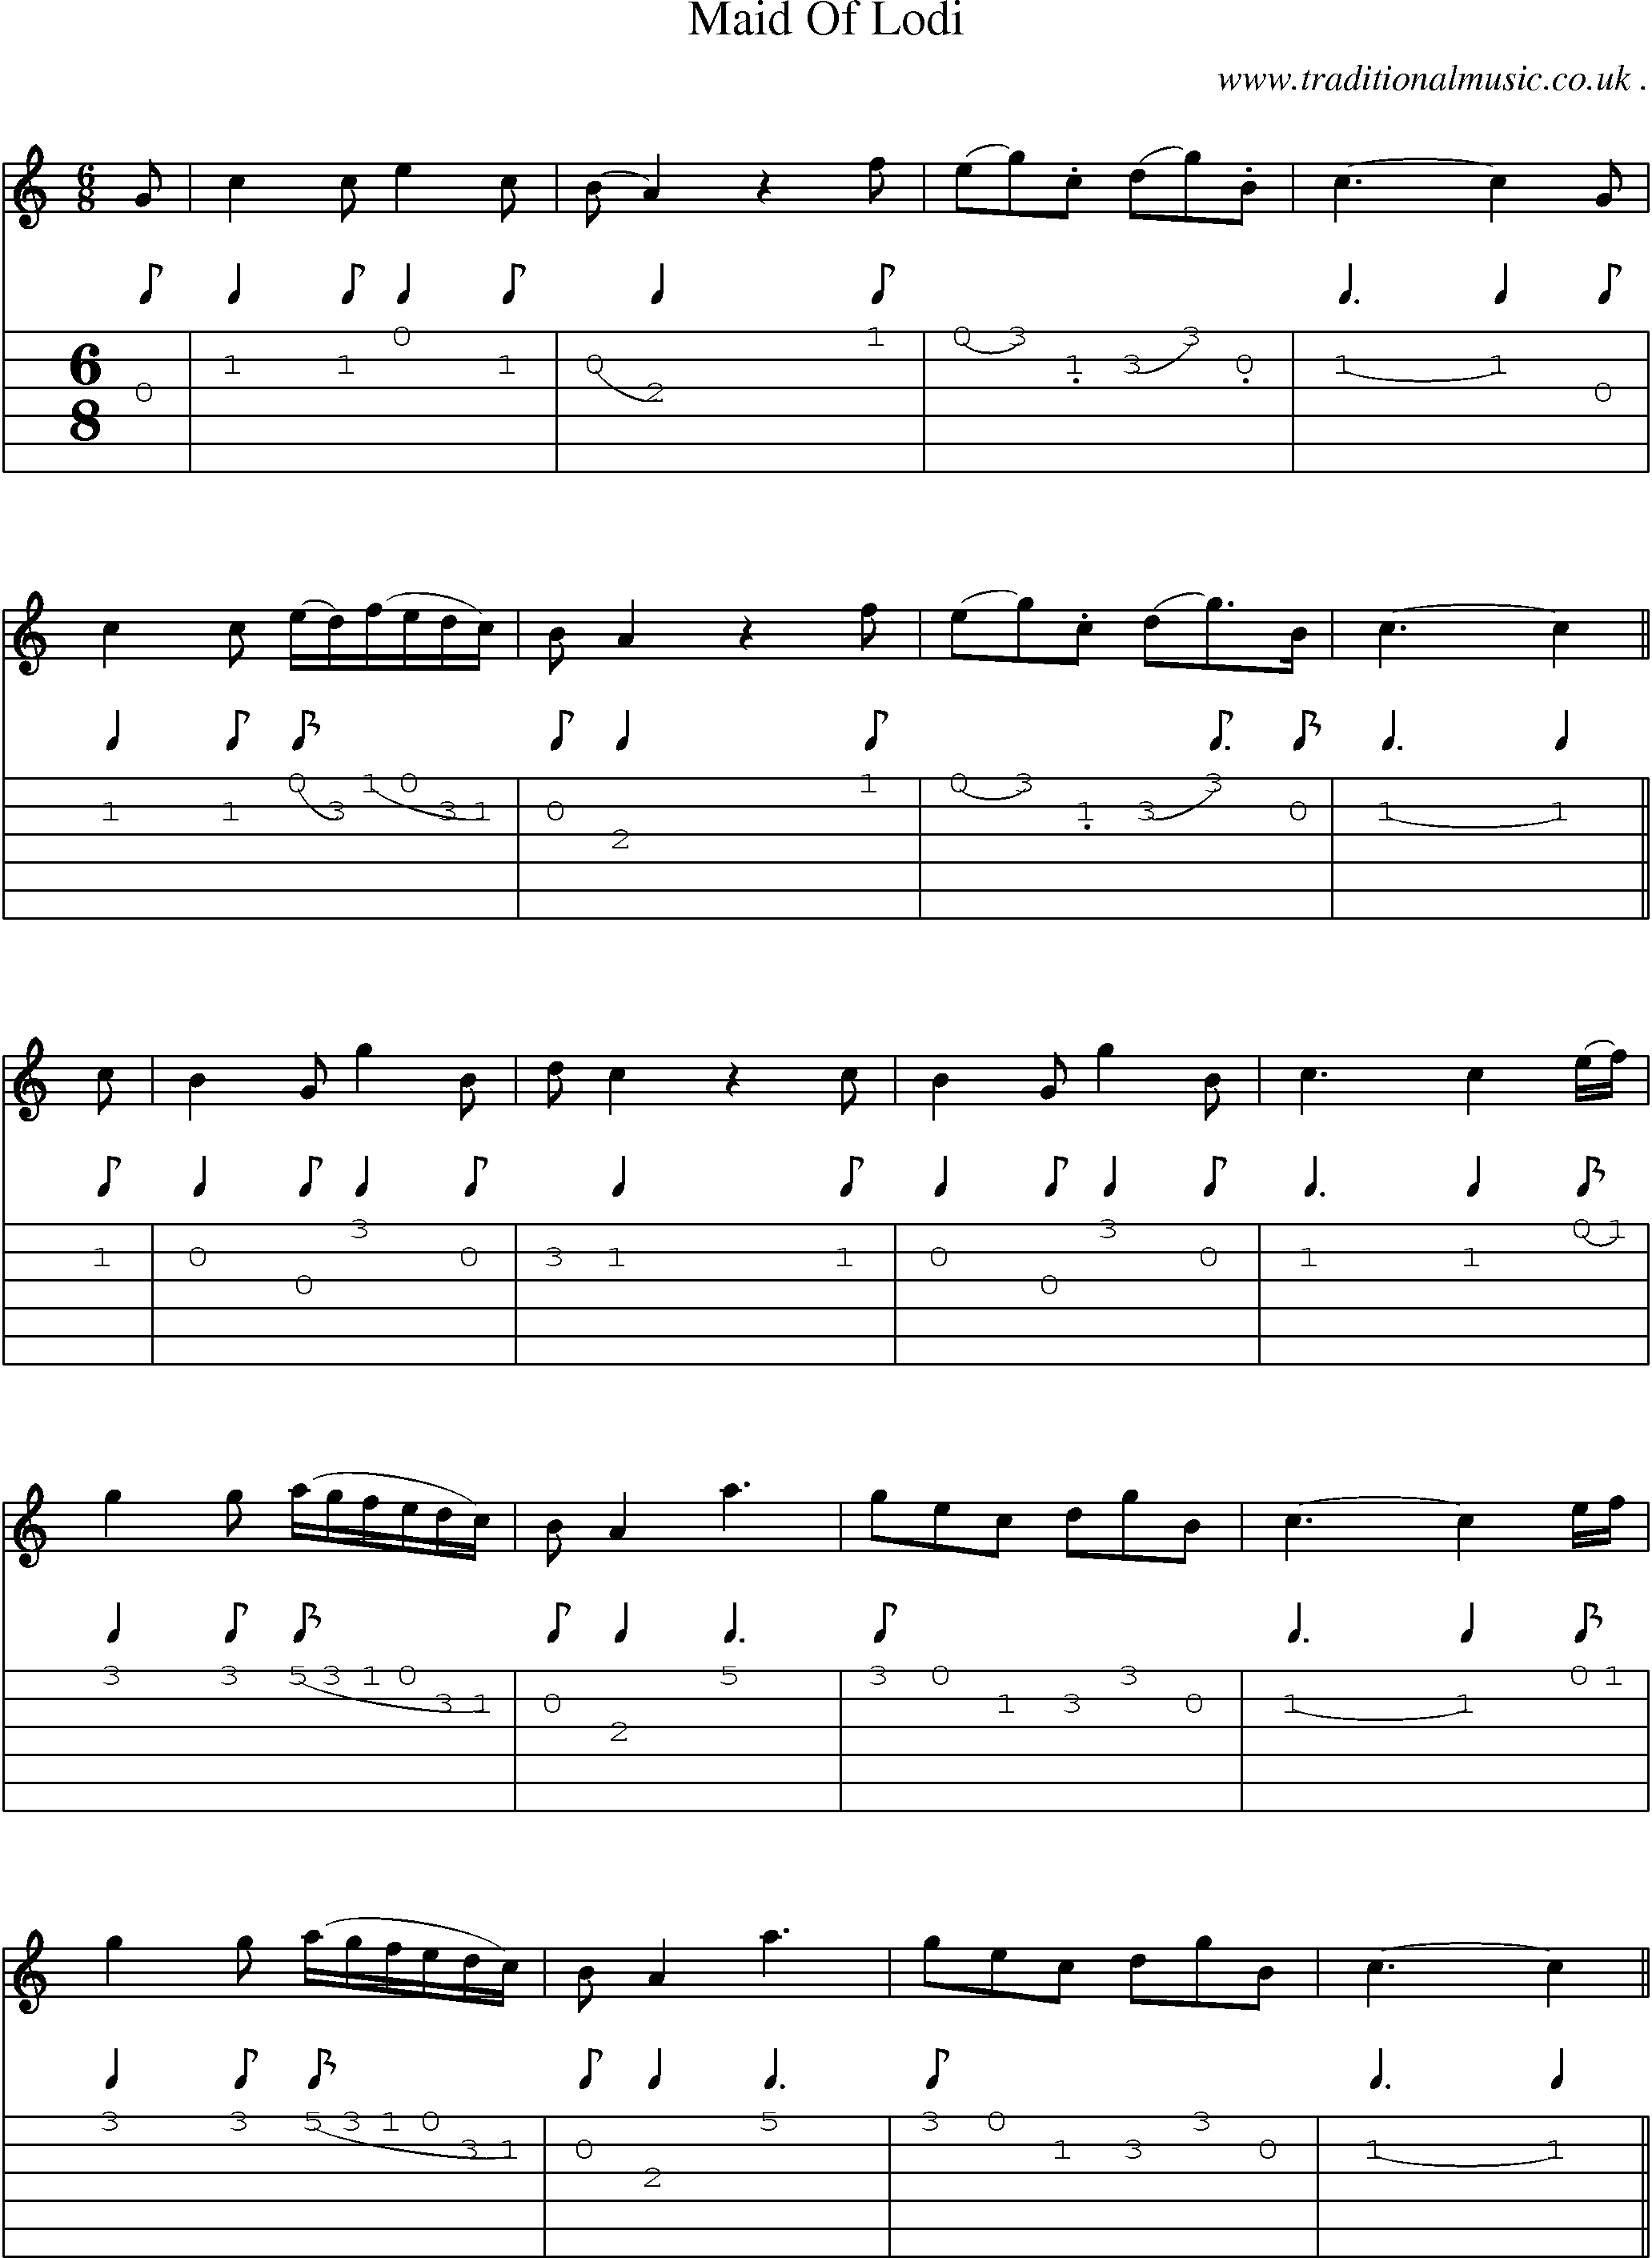 Sheet-Music and Guitar Tabs for Maid Of Lodi